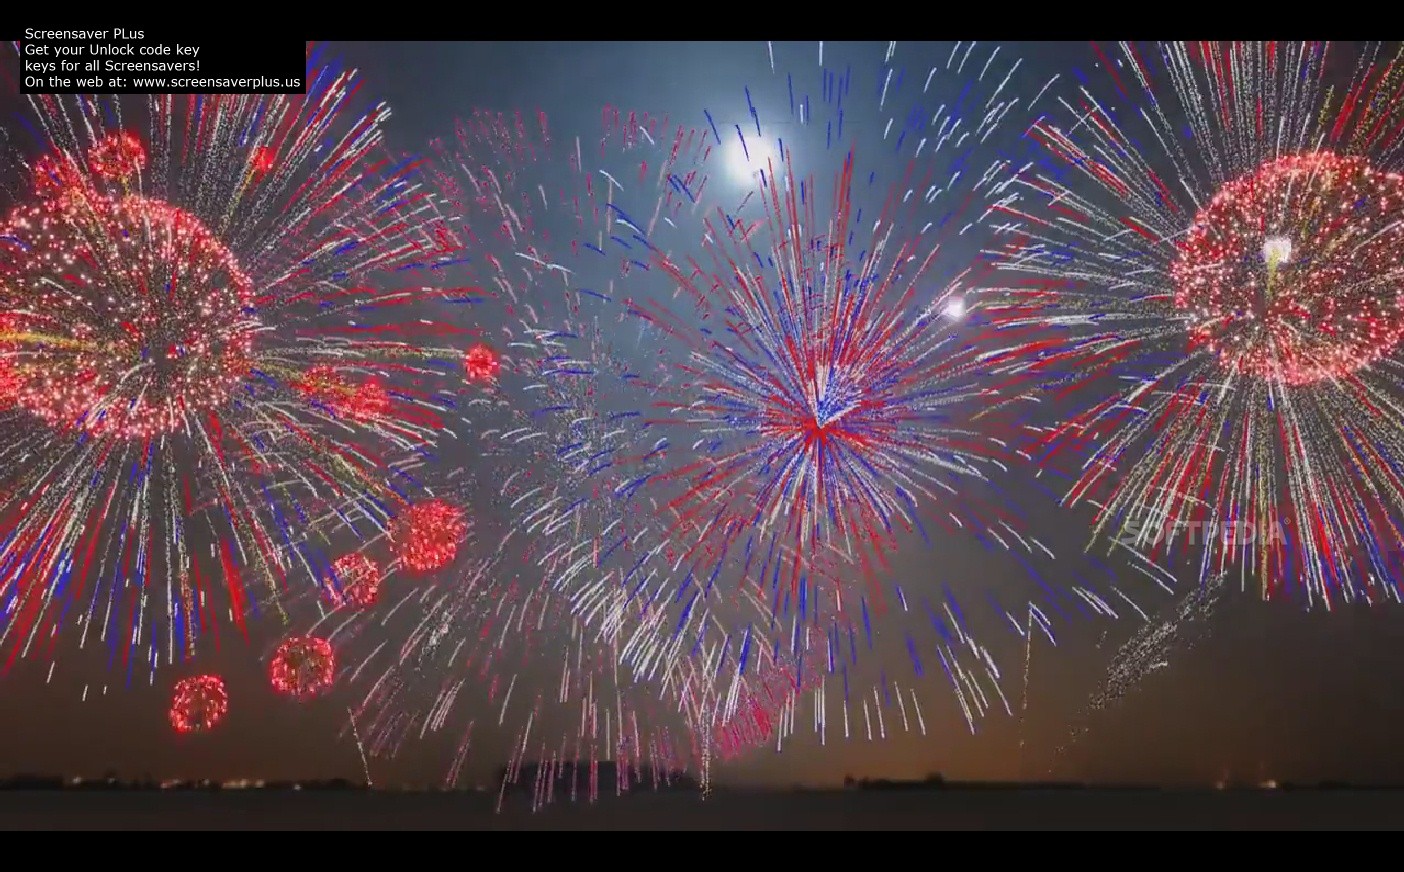 Fireworks Screensaver Is A Simple To Use